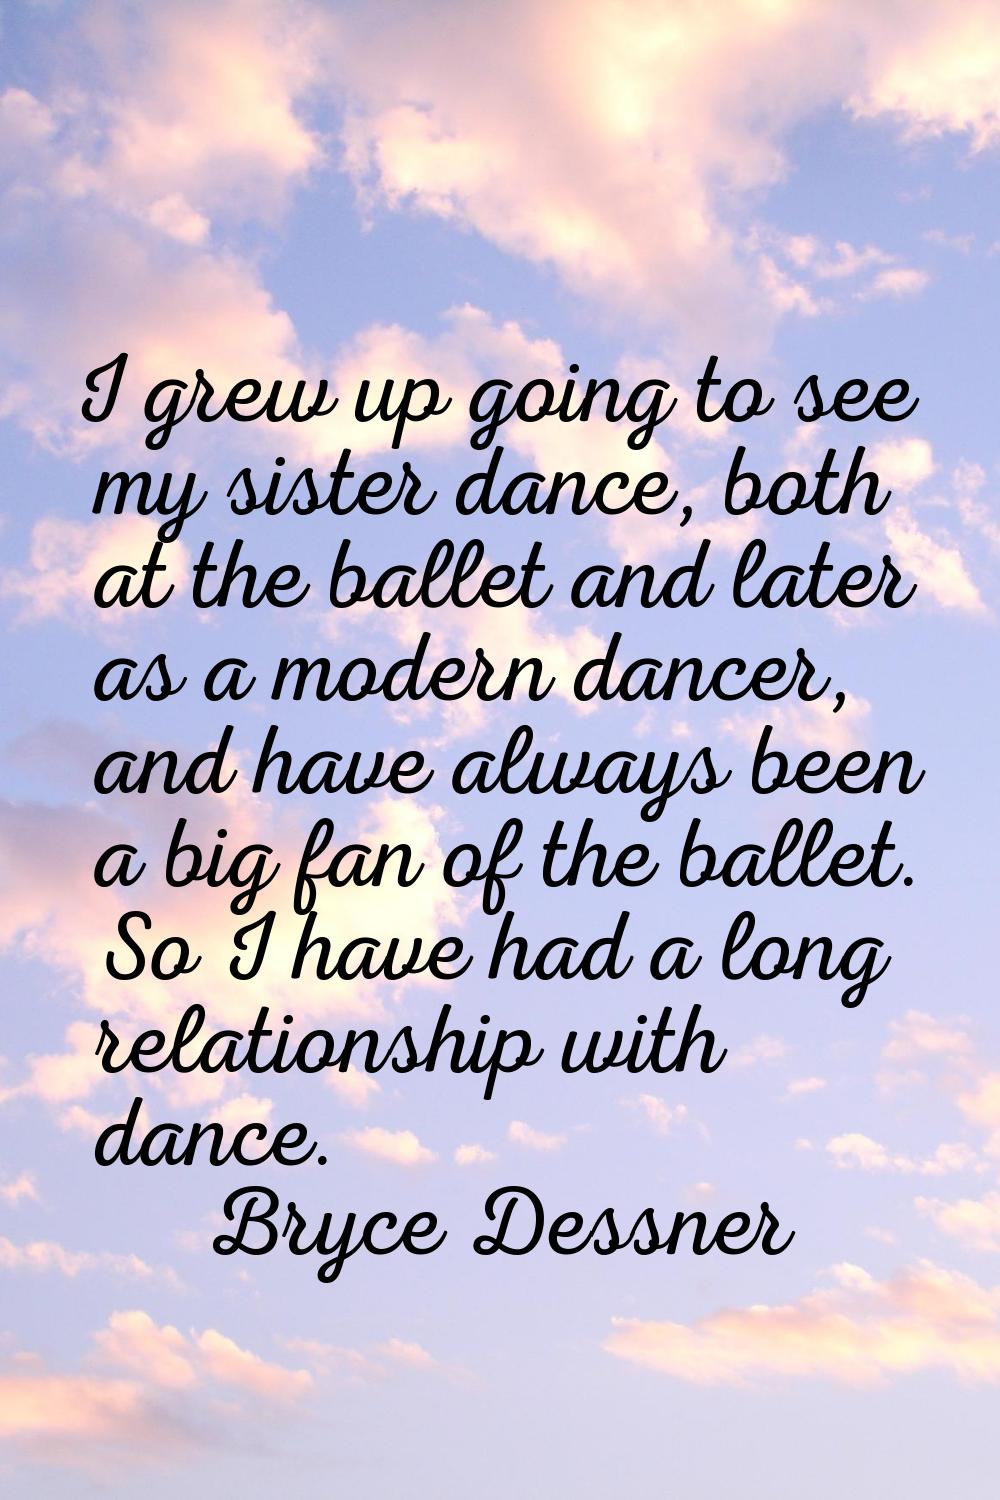 I grew up going to see my sister dance, both at the ballet and later as a modern dancer, and have a